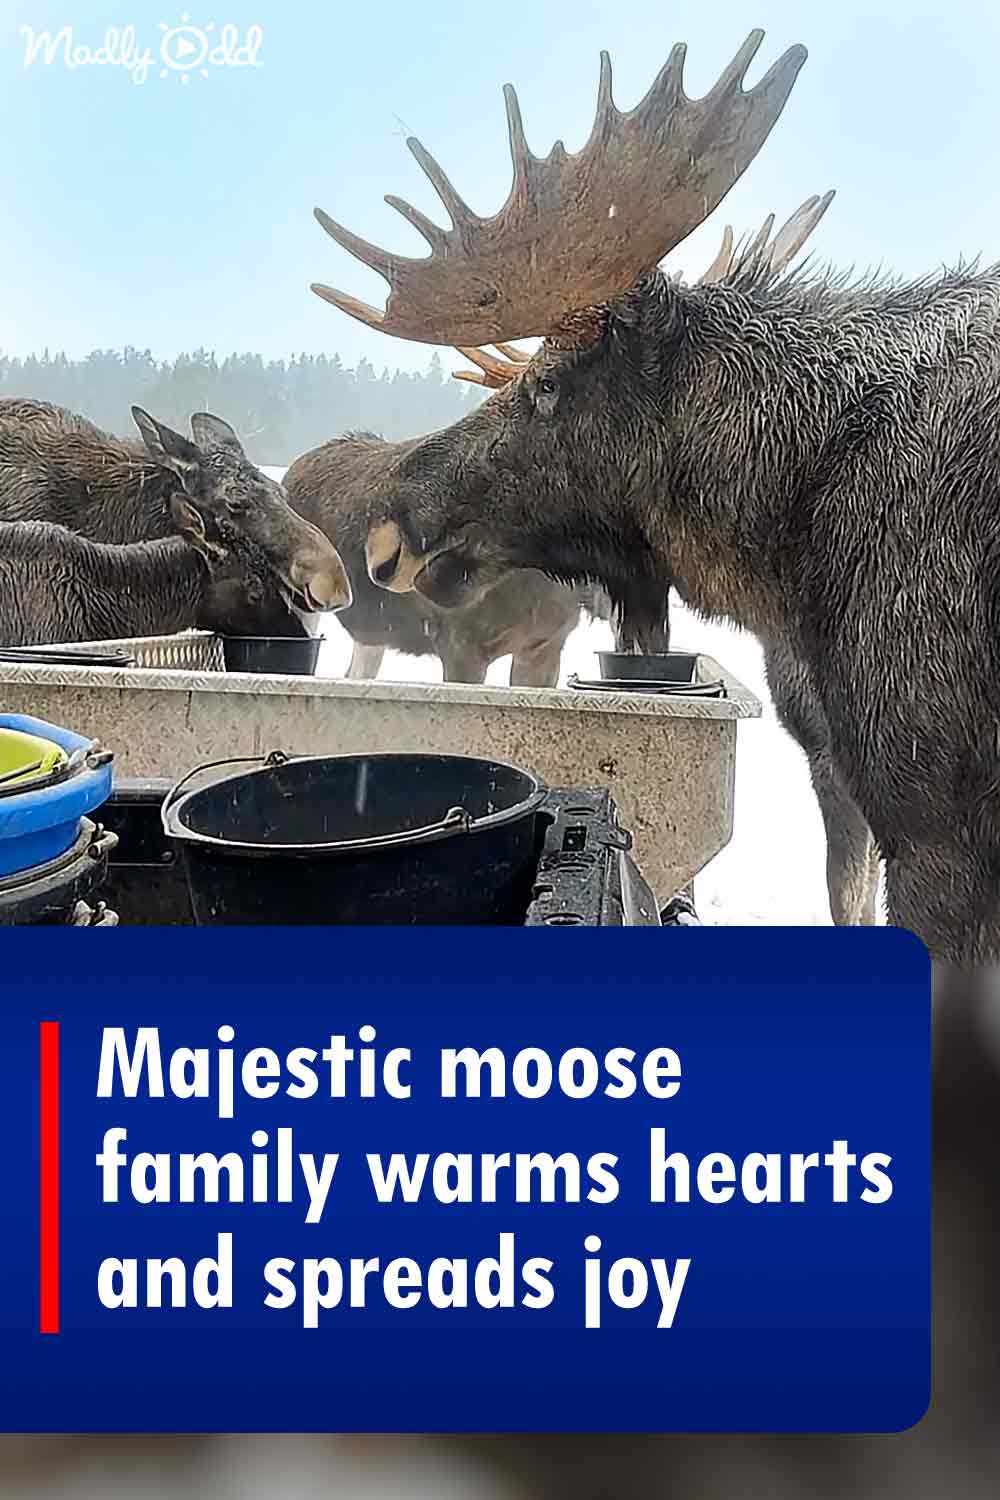 Majestic moose family warms hearts and spreads joy